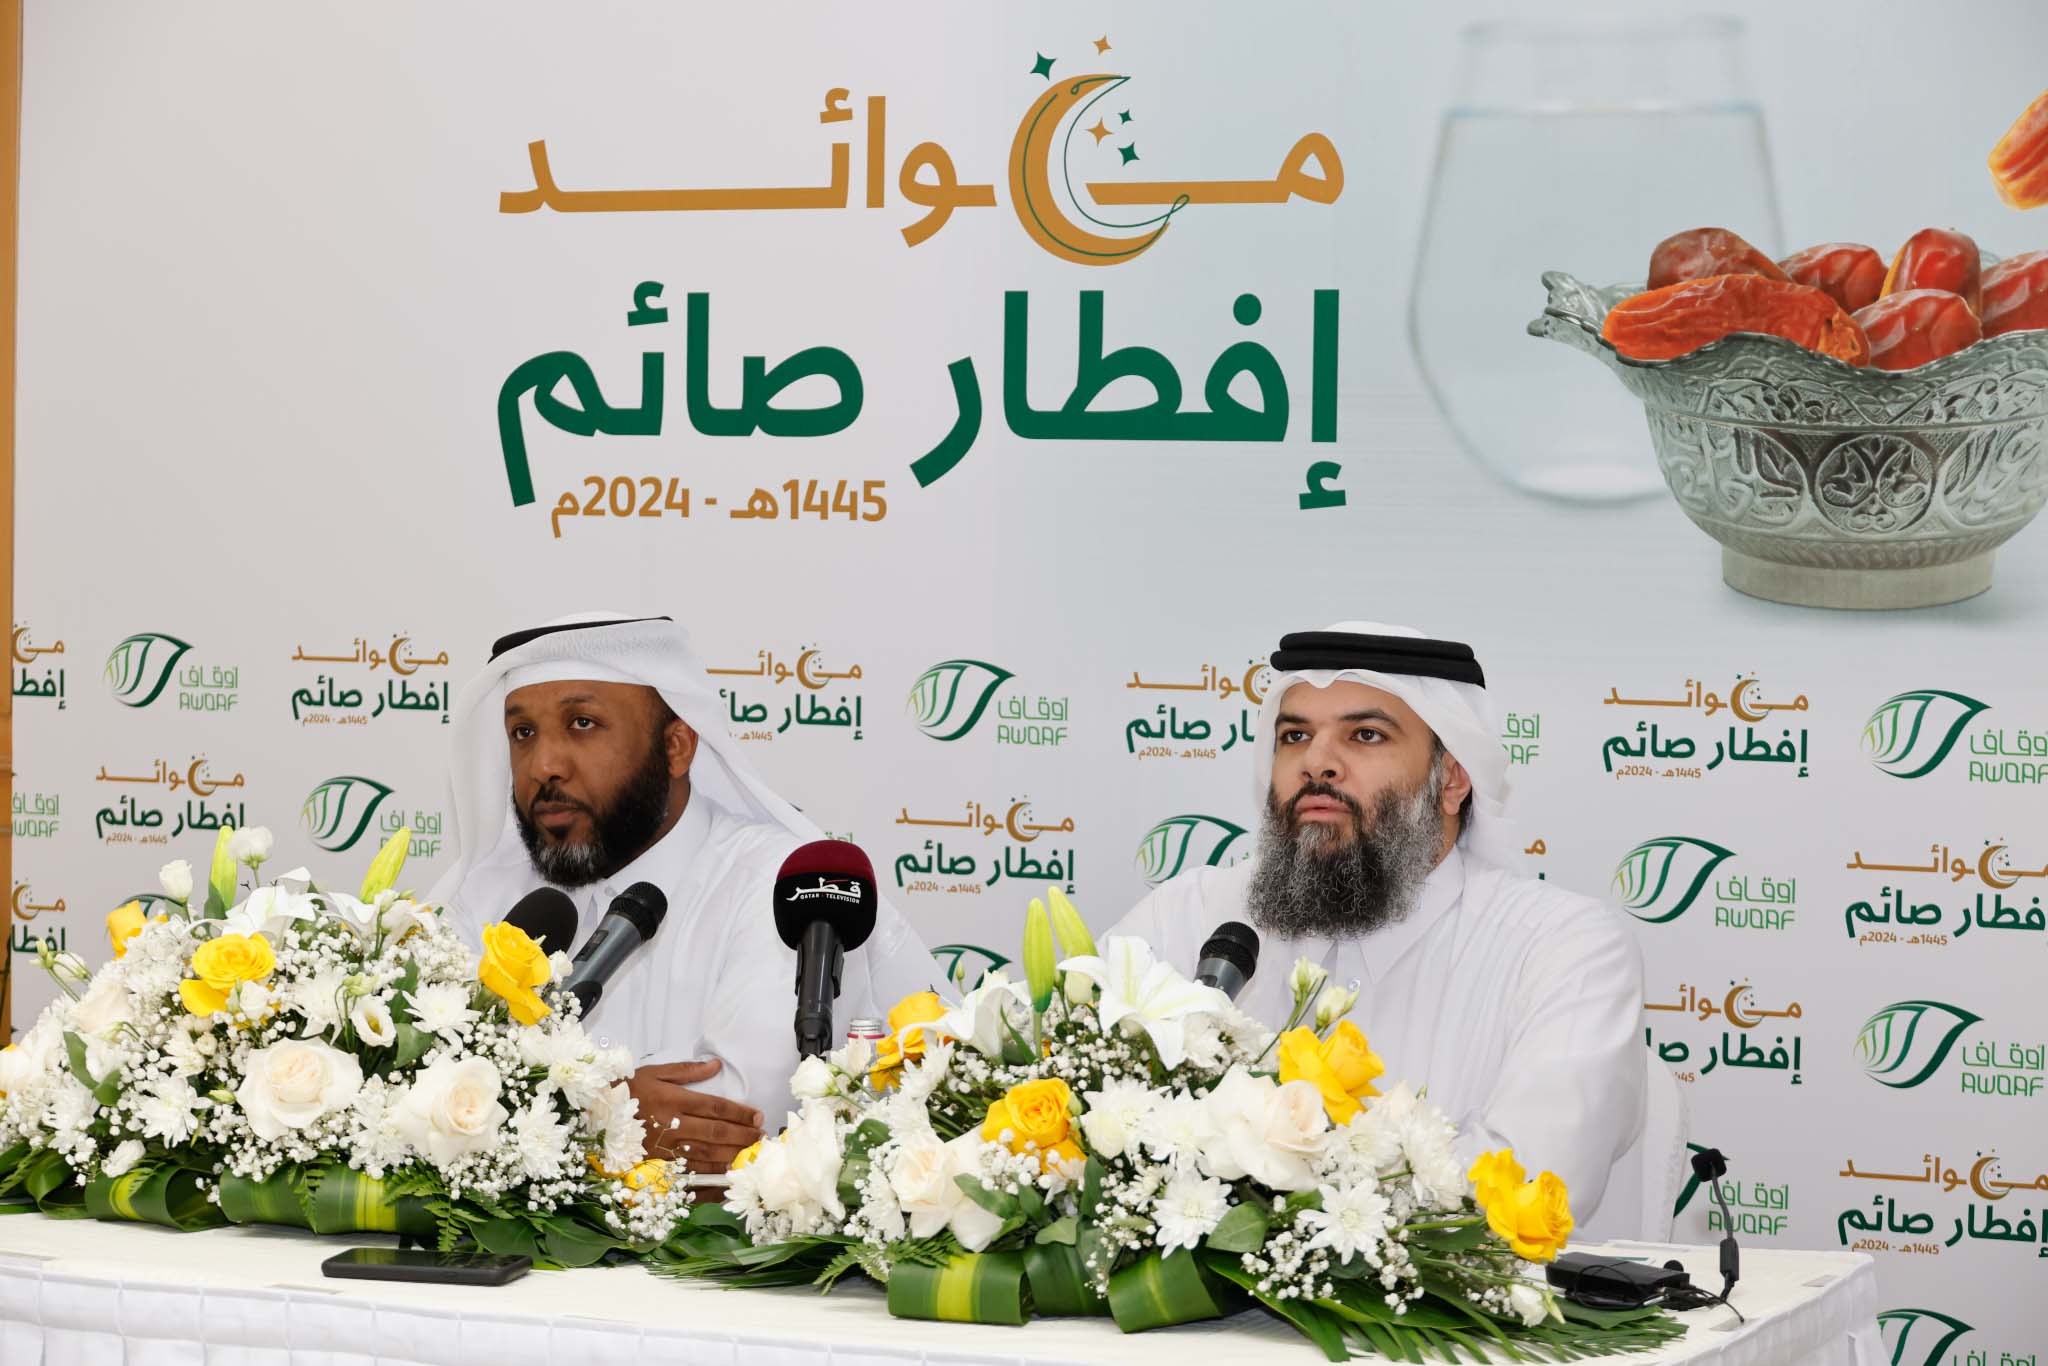 Awqaf Ministry to distribute over 700,000 iftar meals across Qatar this Ramadan